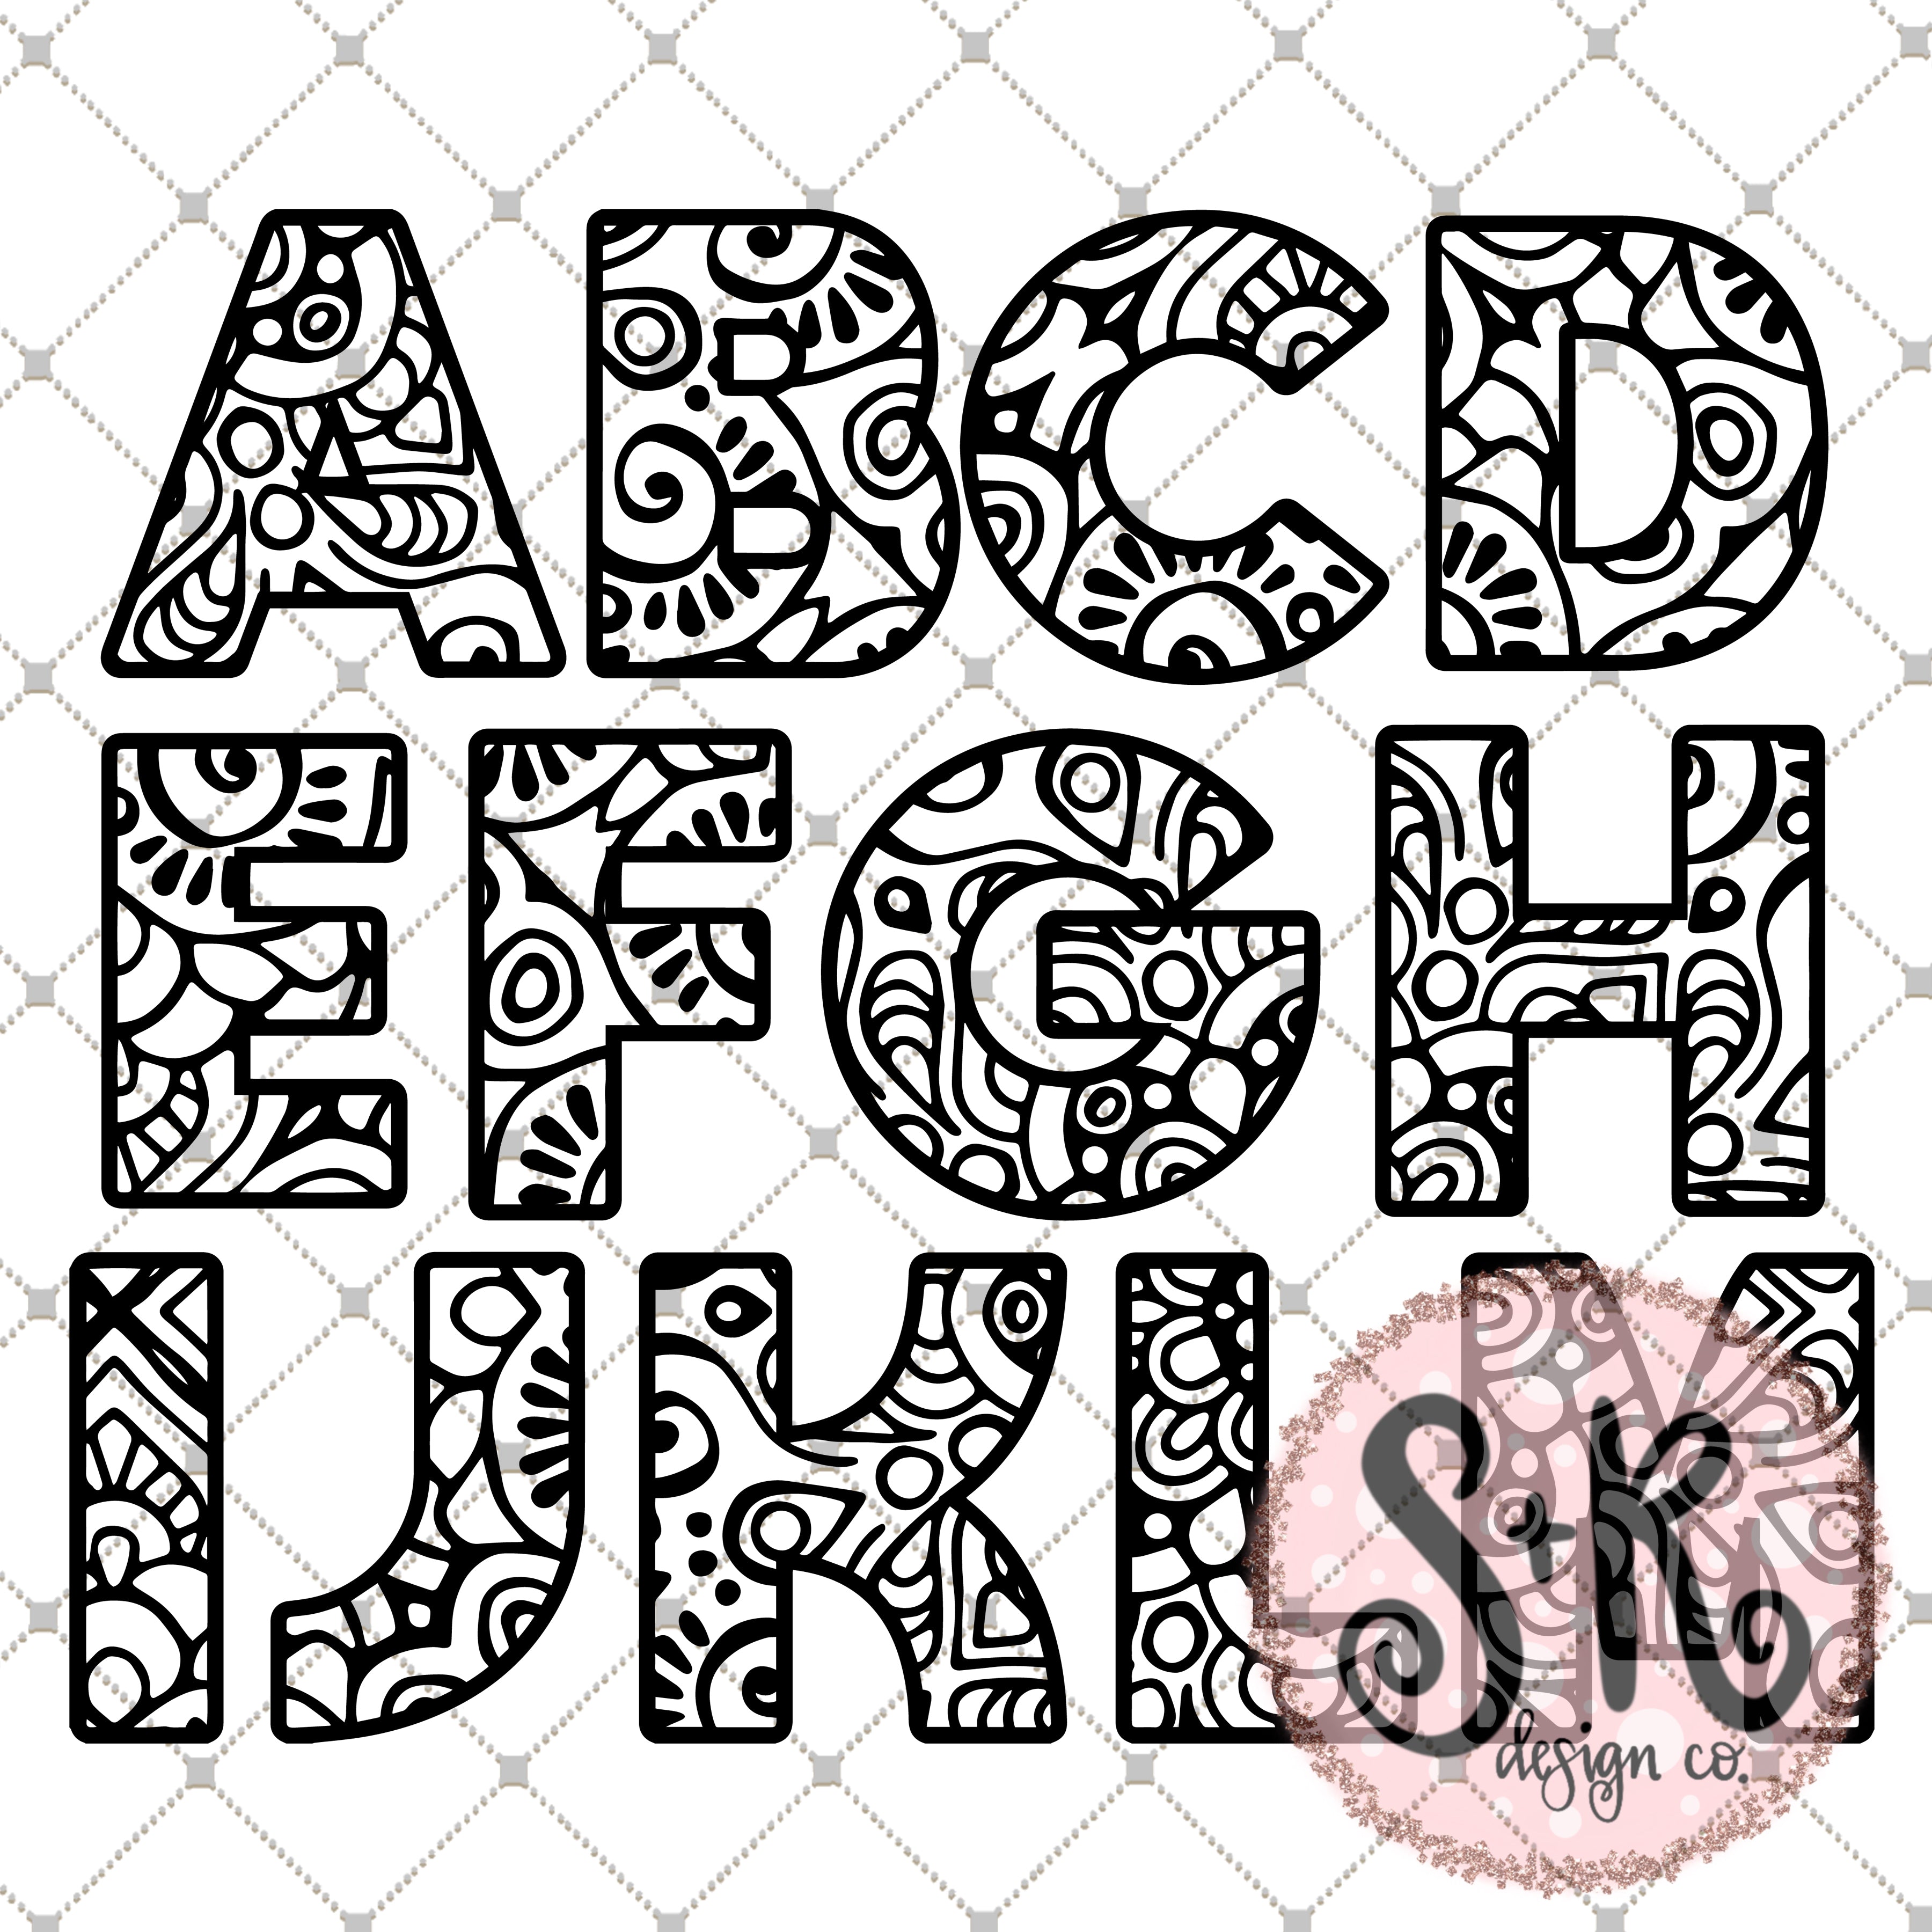 Download Unicorn Zentangle Monogram Frame Svg Dxf Png Scout And Rose Design Co